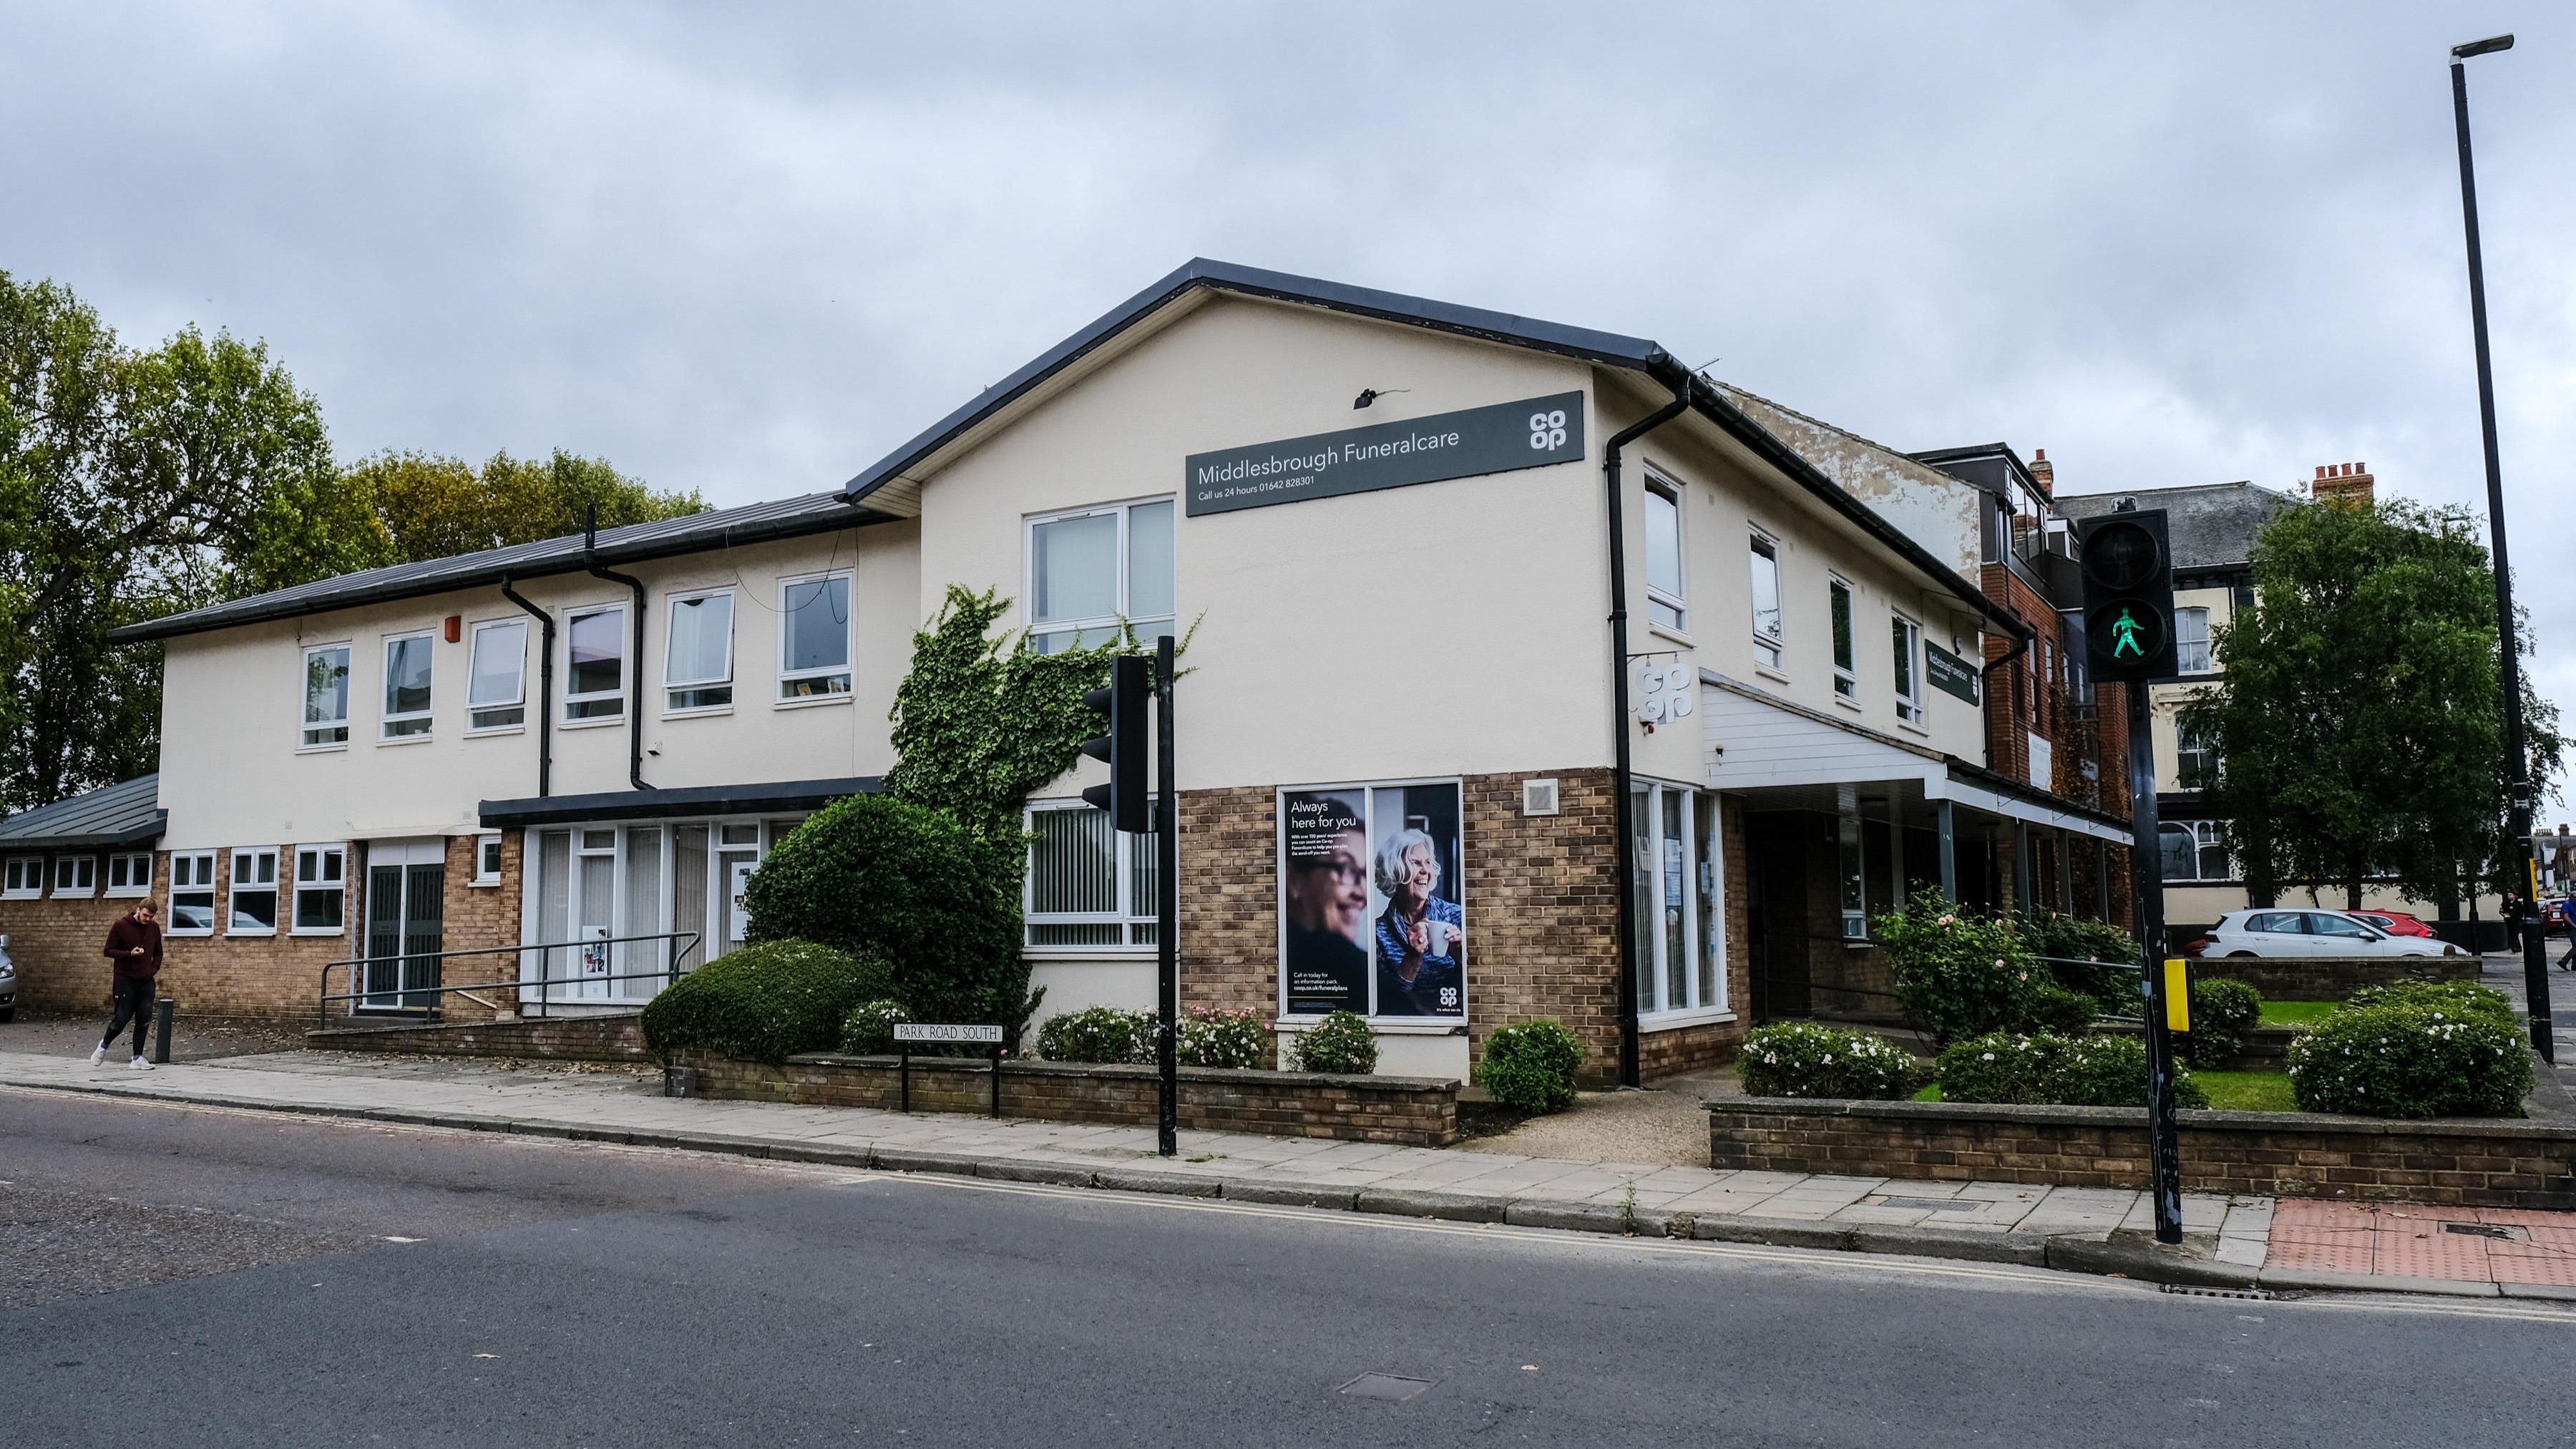 Images Middlesbrough Funeralcare